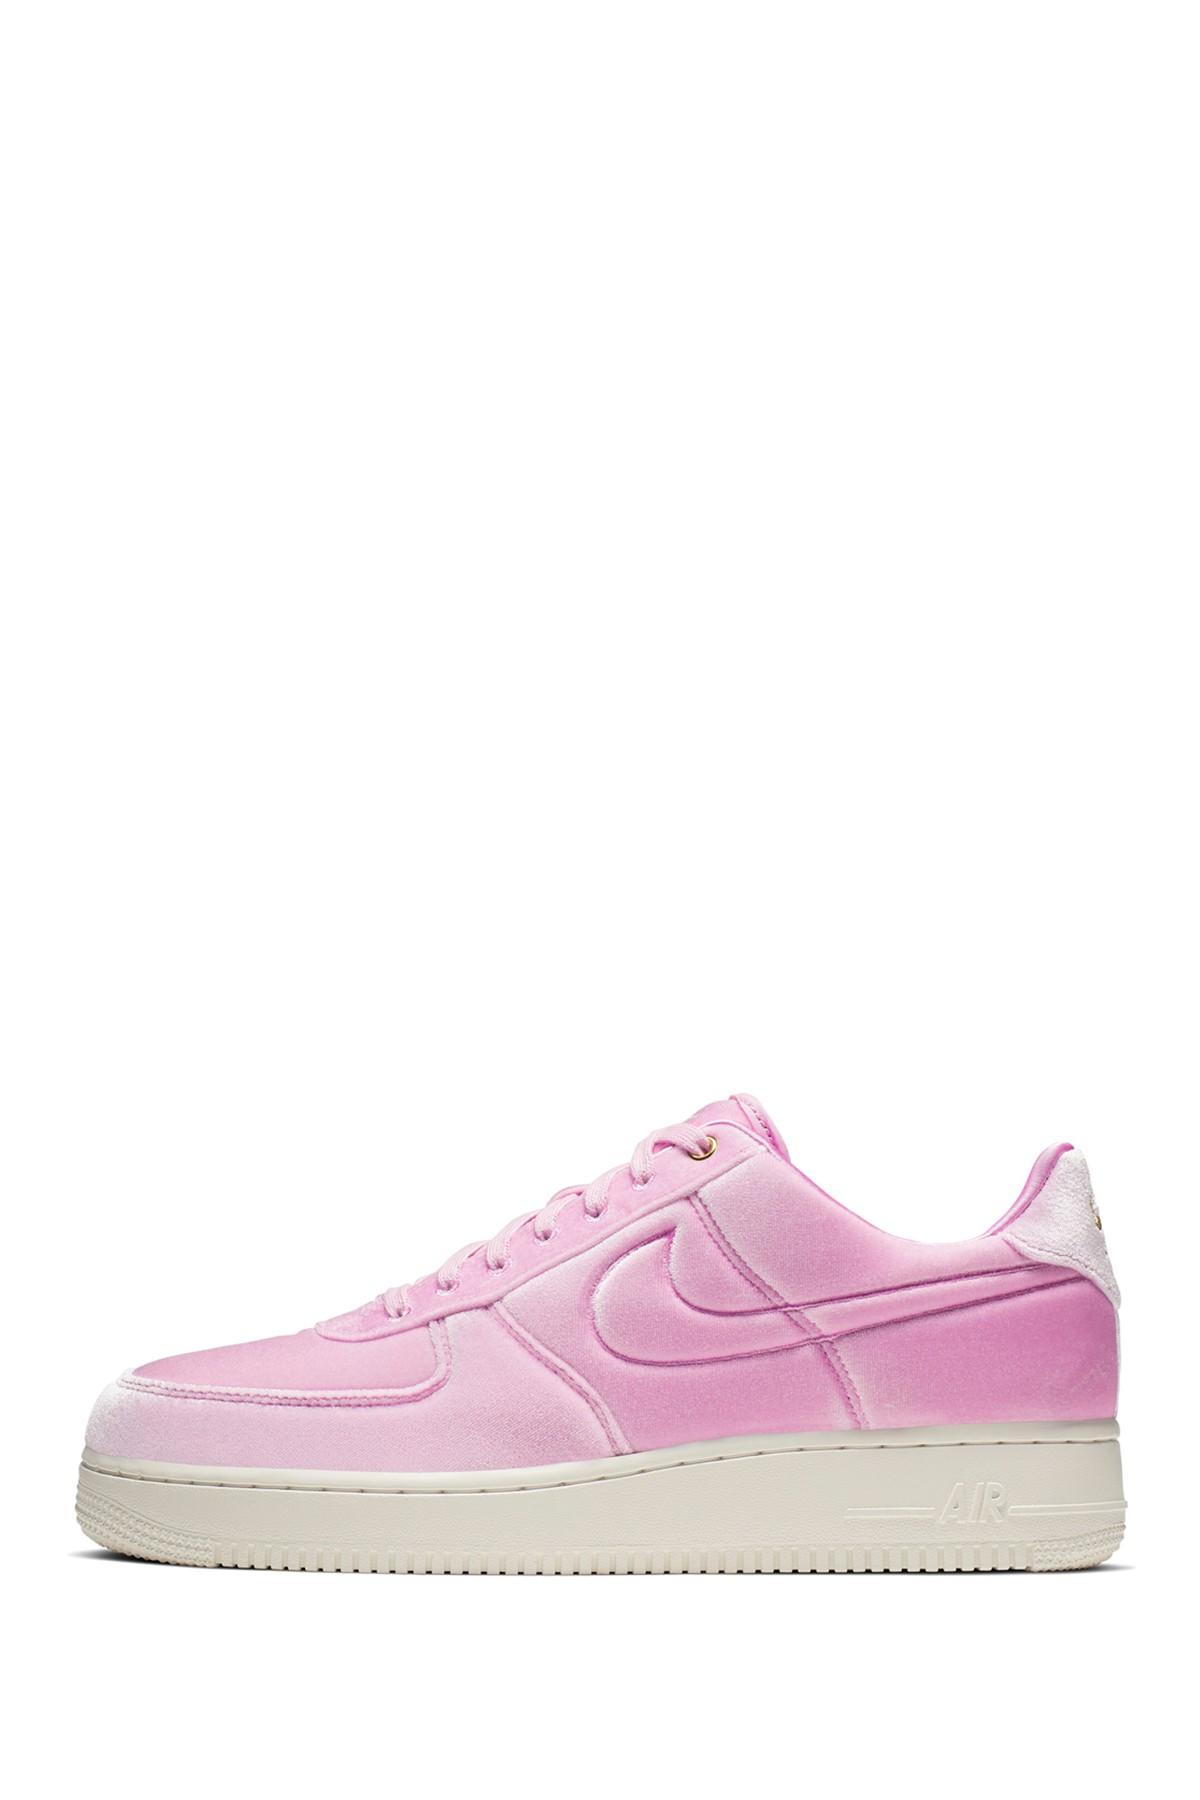 nike air force pink velvet,Cheap,Sell,OFF 69%,wellcomwin.it